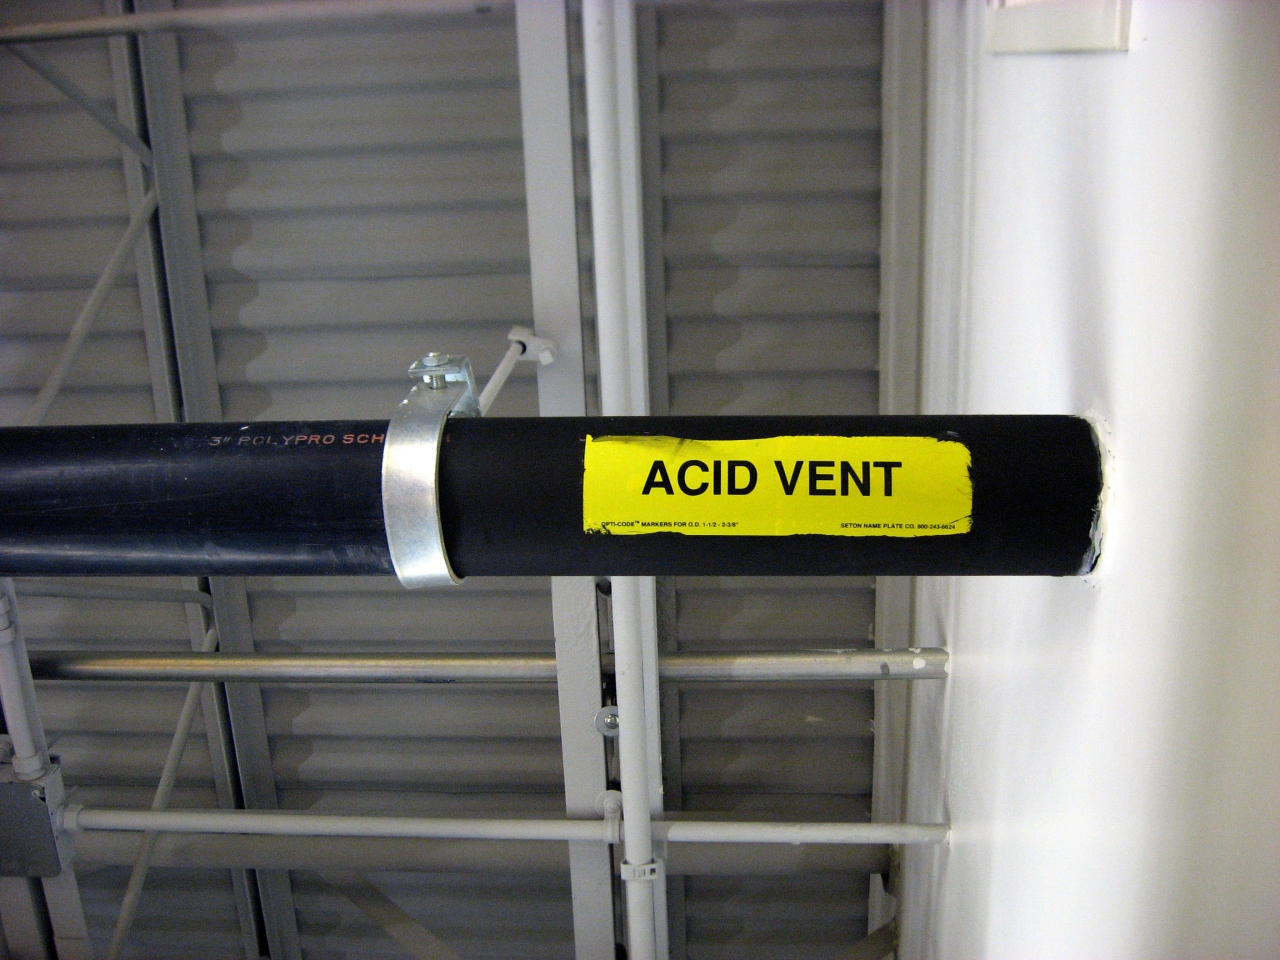 Overhead pipe labeled 'Acid Vent' in the research library.